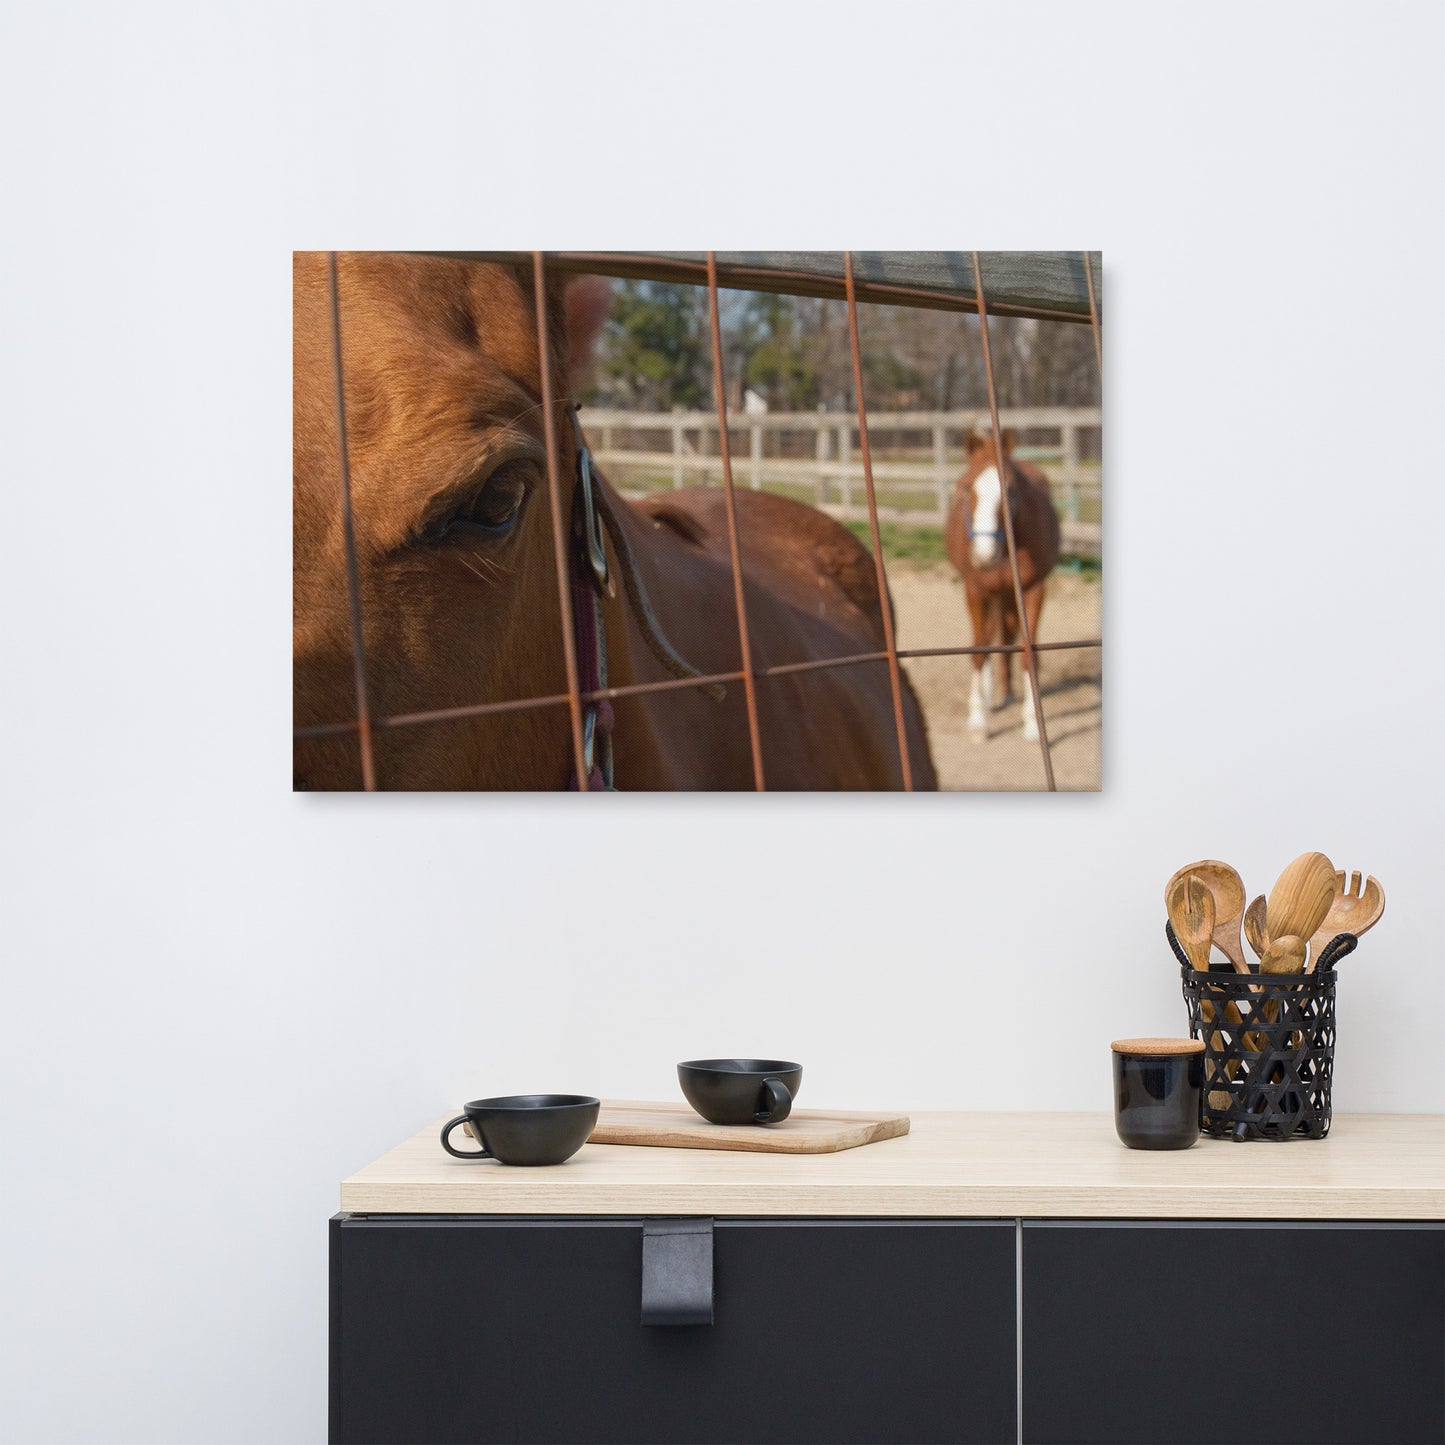 Fenced In Animal / Horse Photograph Canvas Wall Art Prints